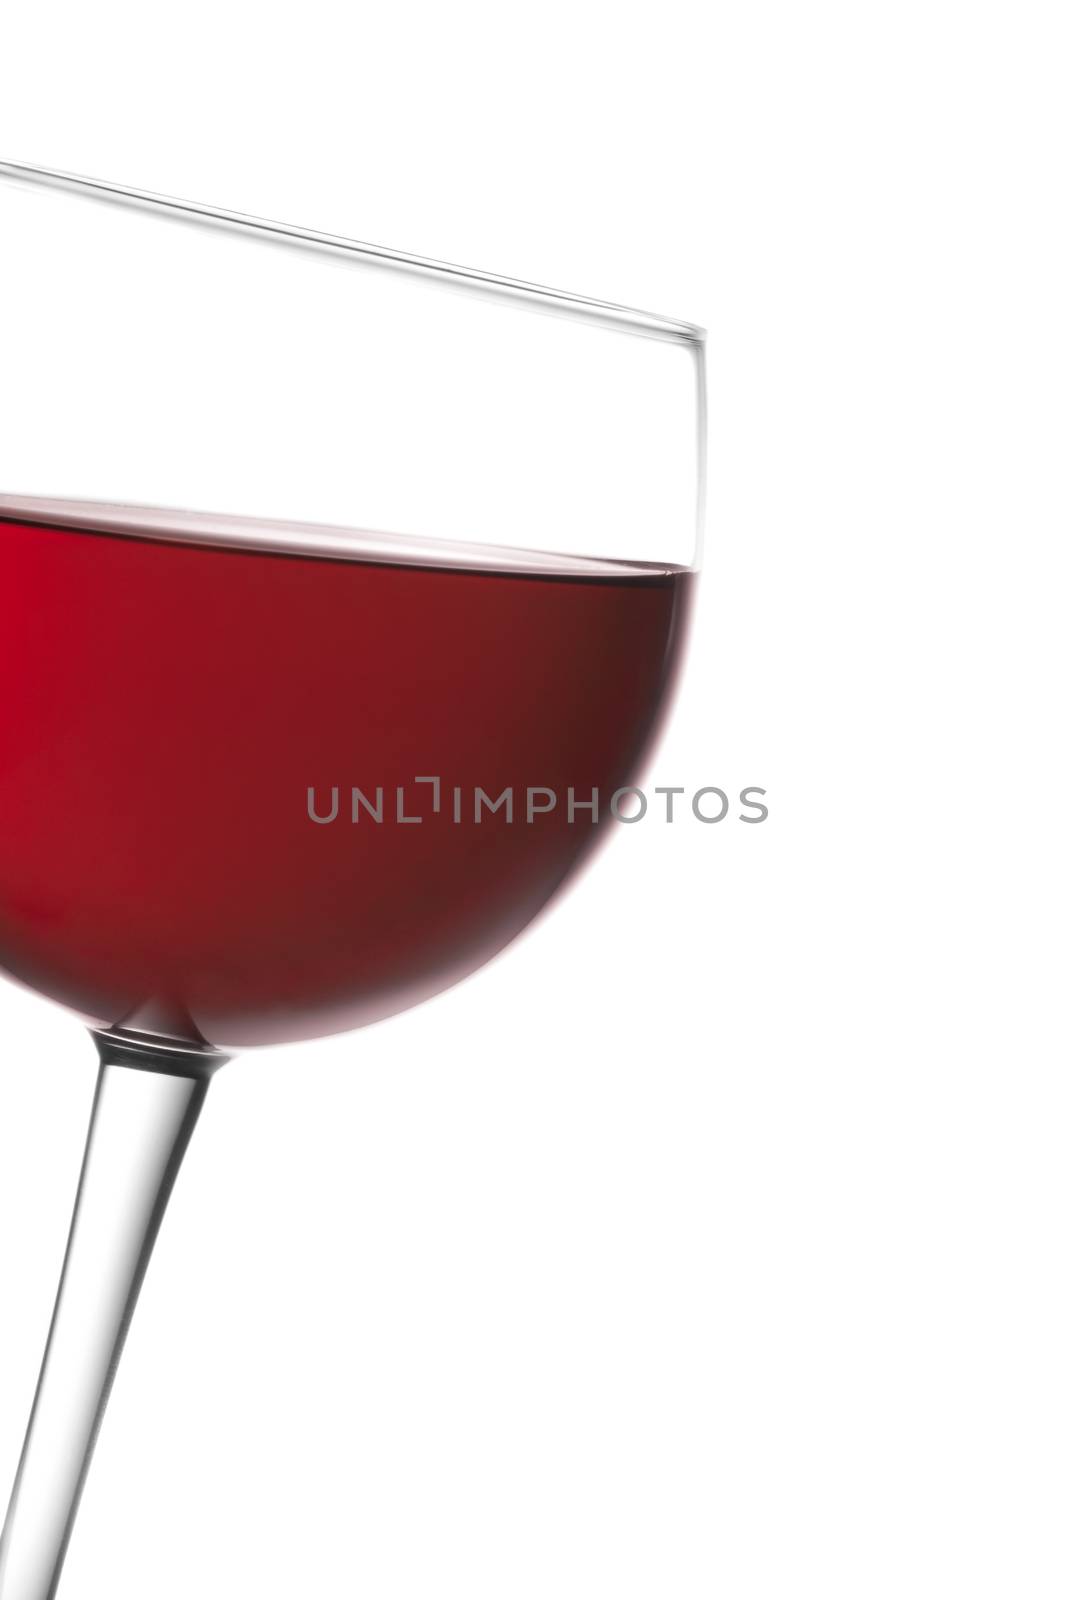 glass of red wine tilted with space for text on a white background